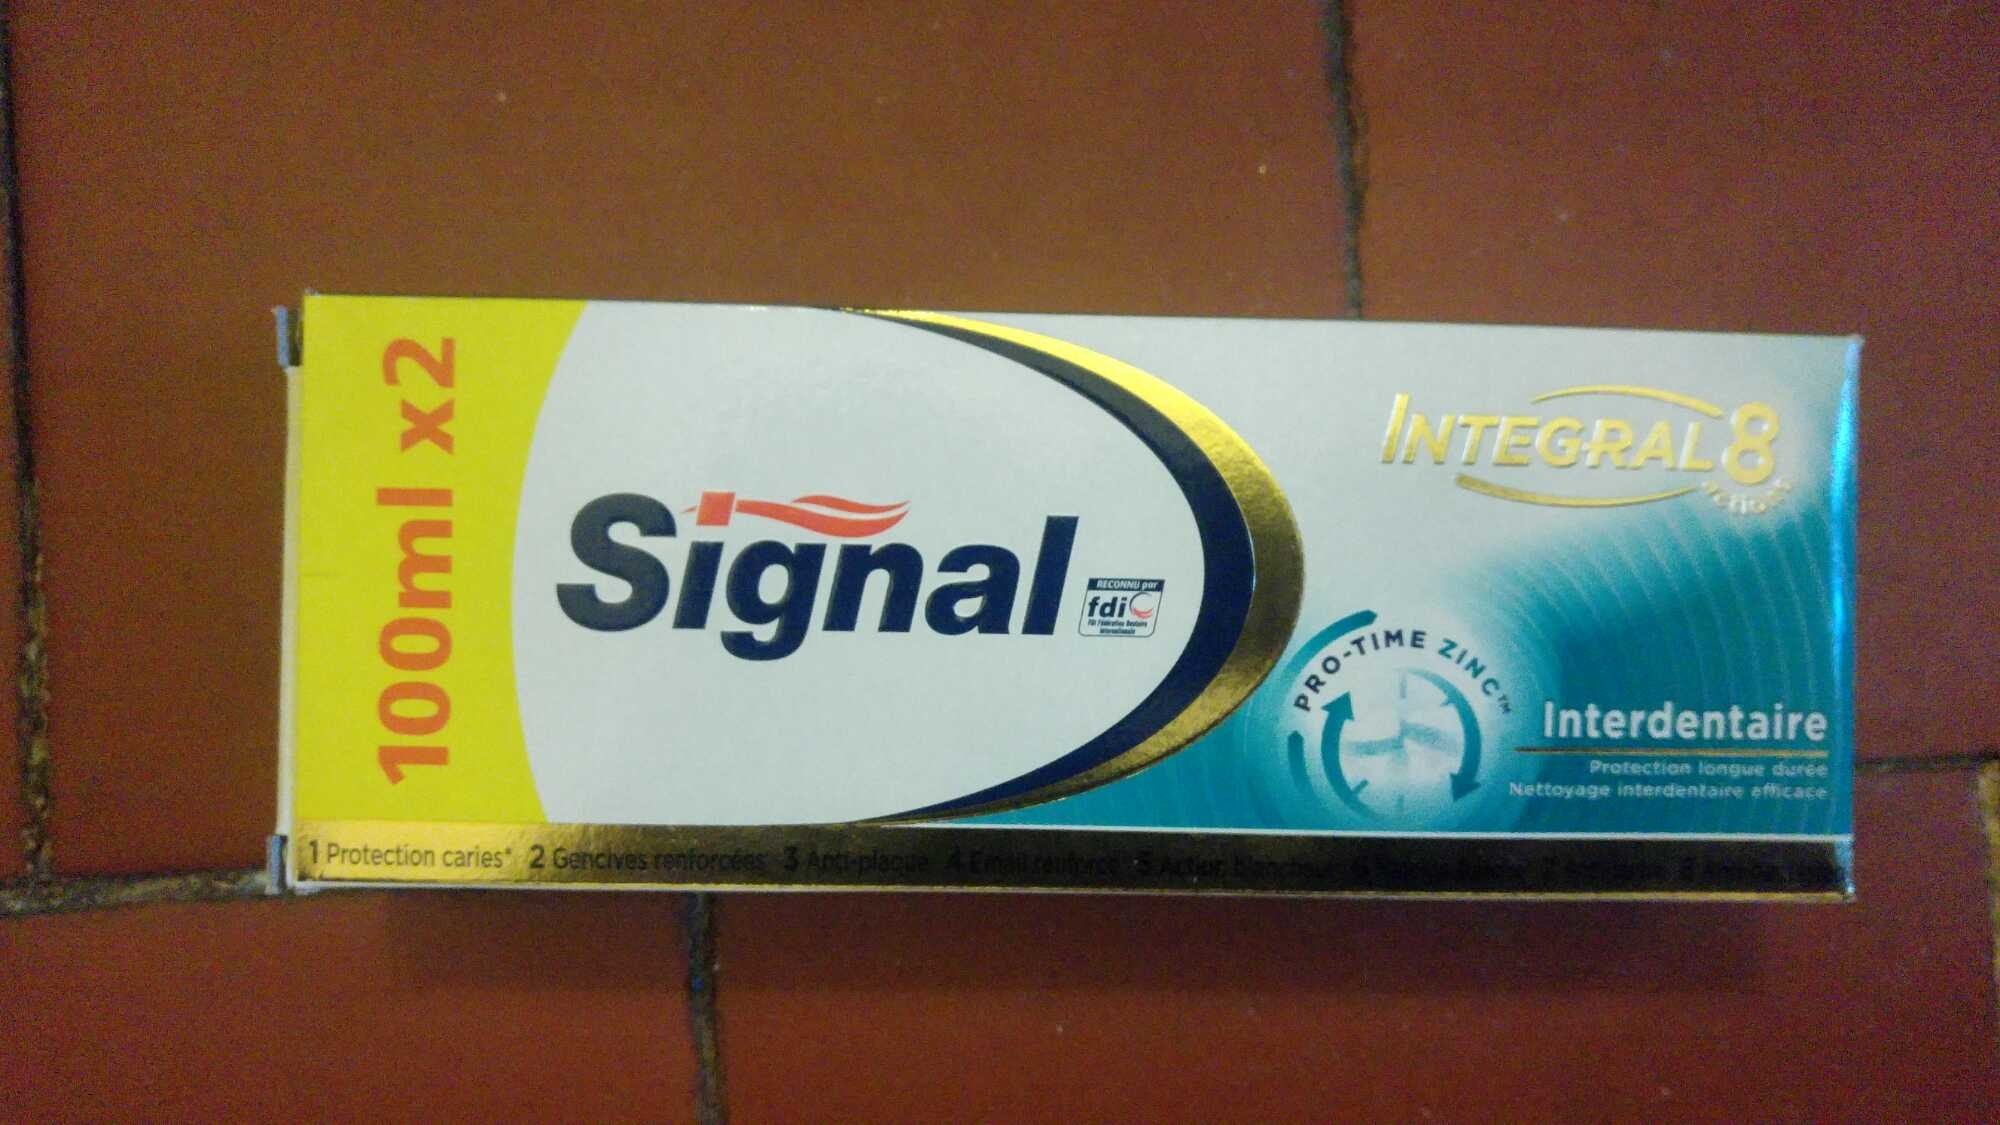 Signal Integral 8 Dentifrice Interdentaire Bitube 100ml - Product - fr